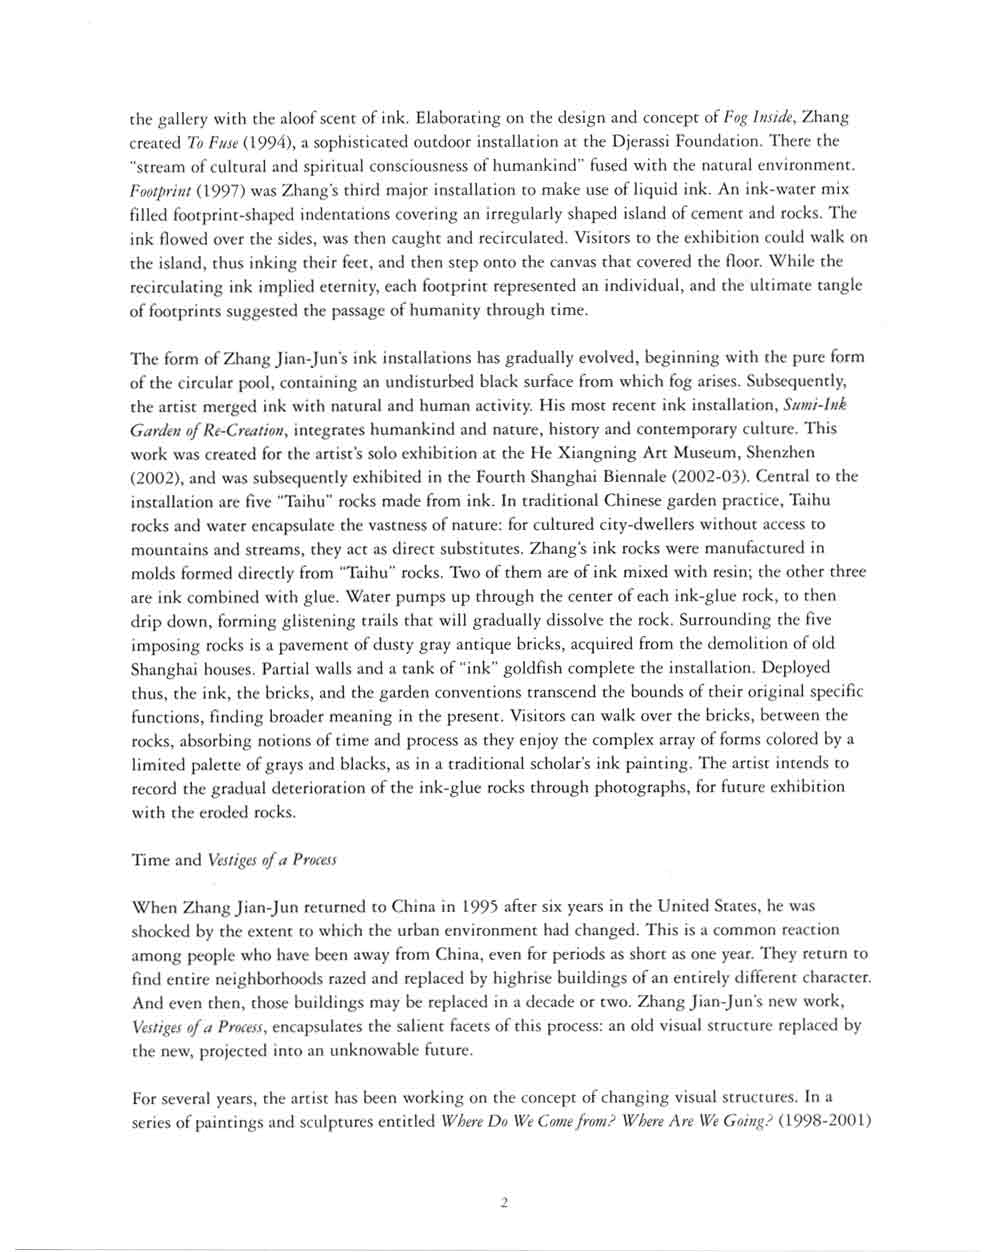 Visual Experience of Time and Cultural Form Installations by Zhang Jian-Jun, essay, pg 2